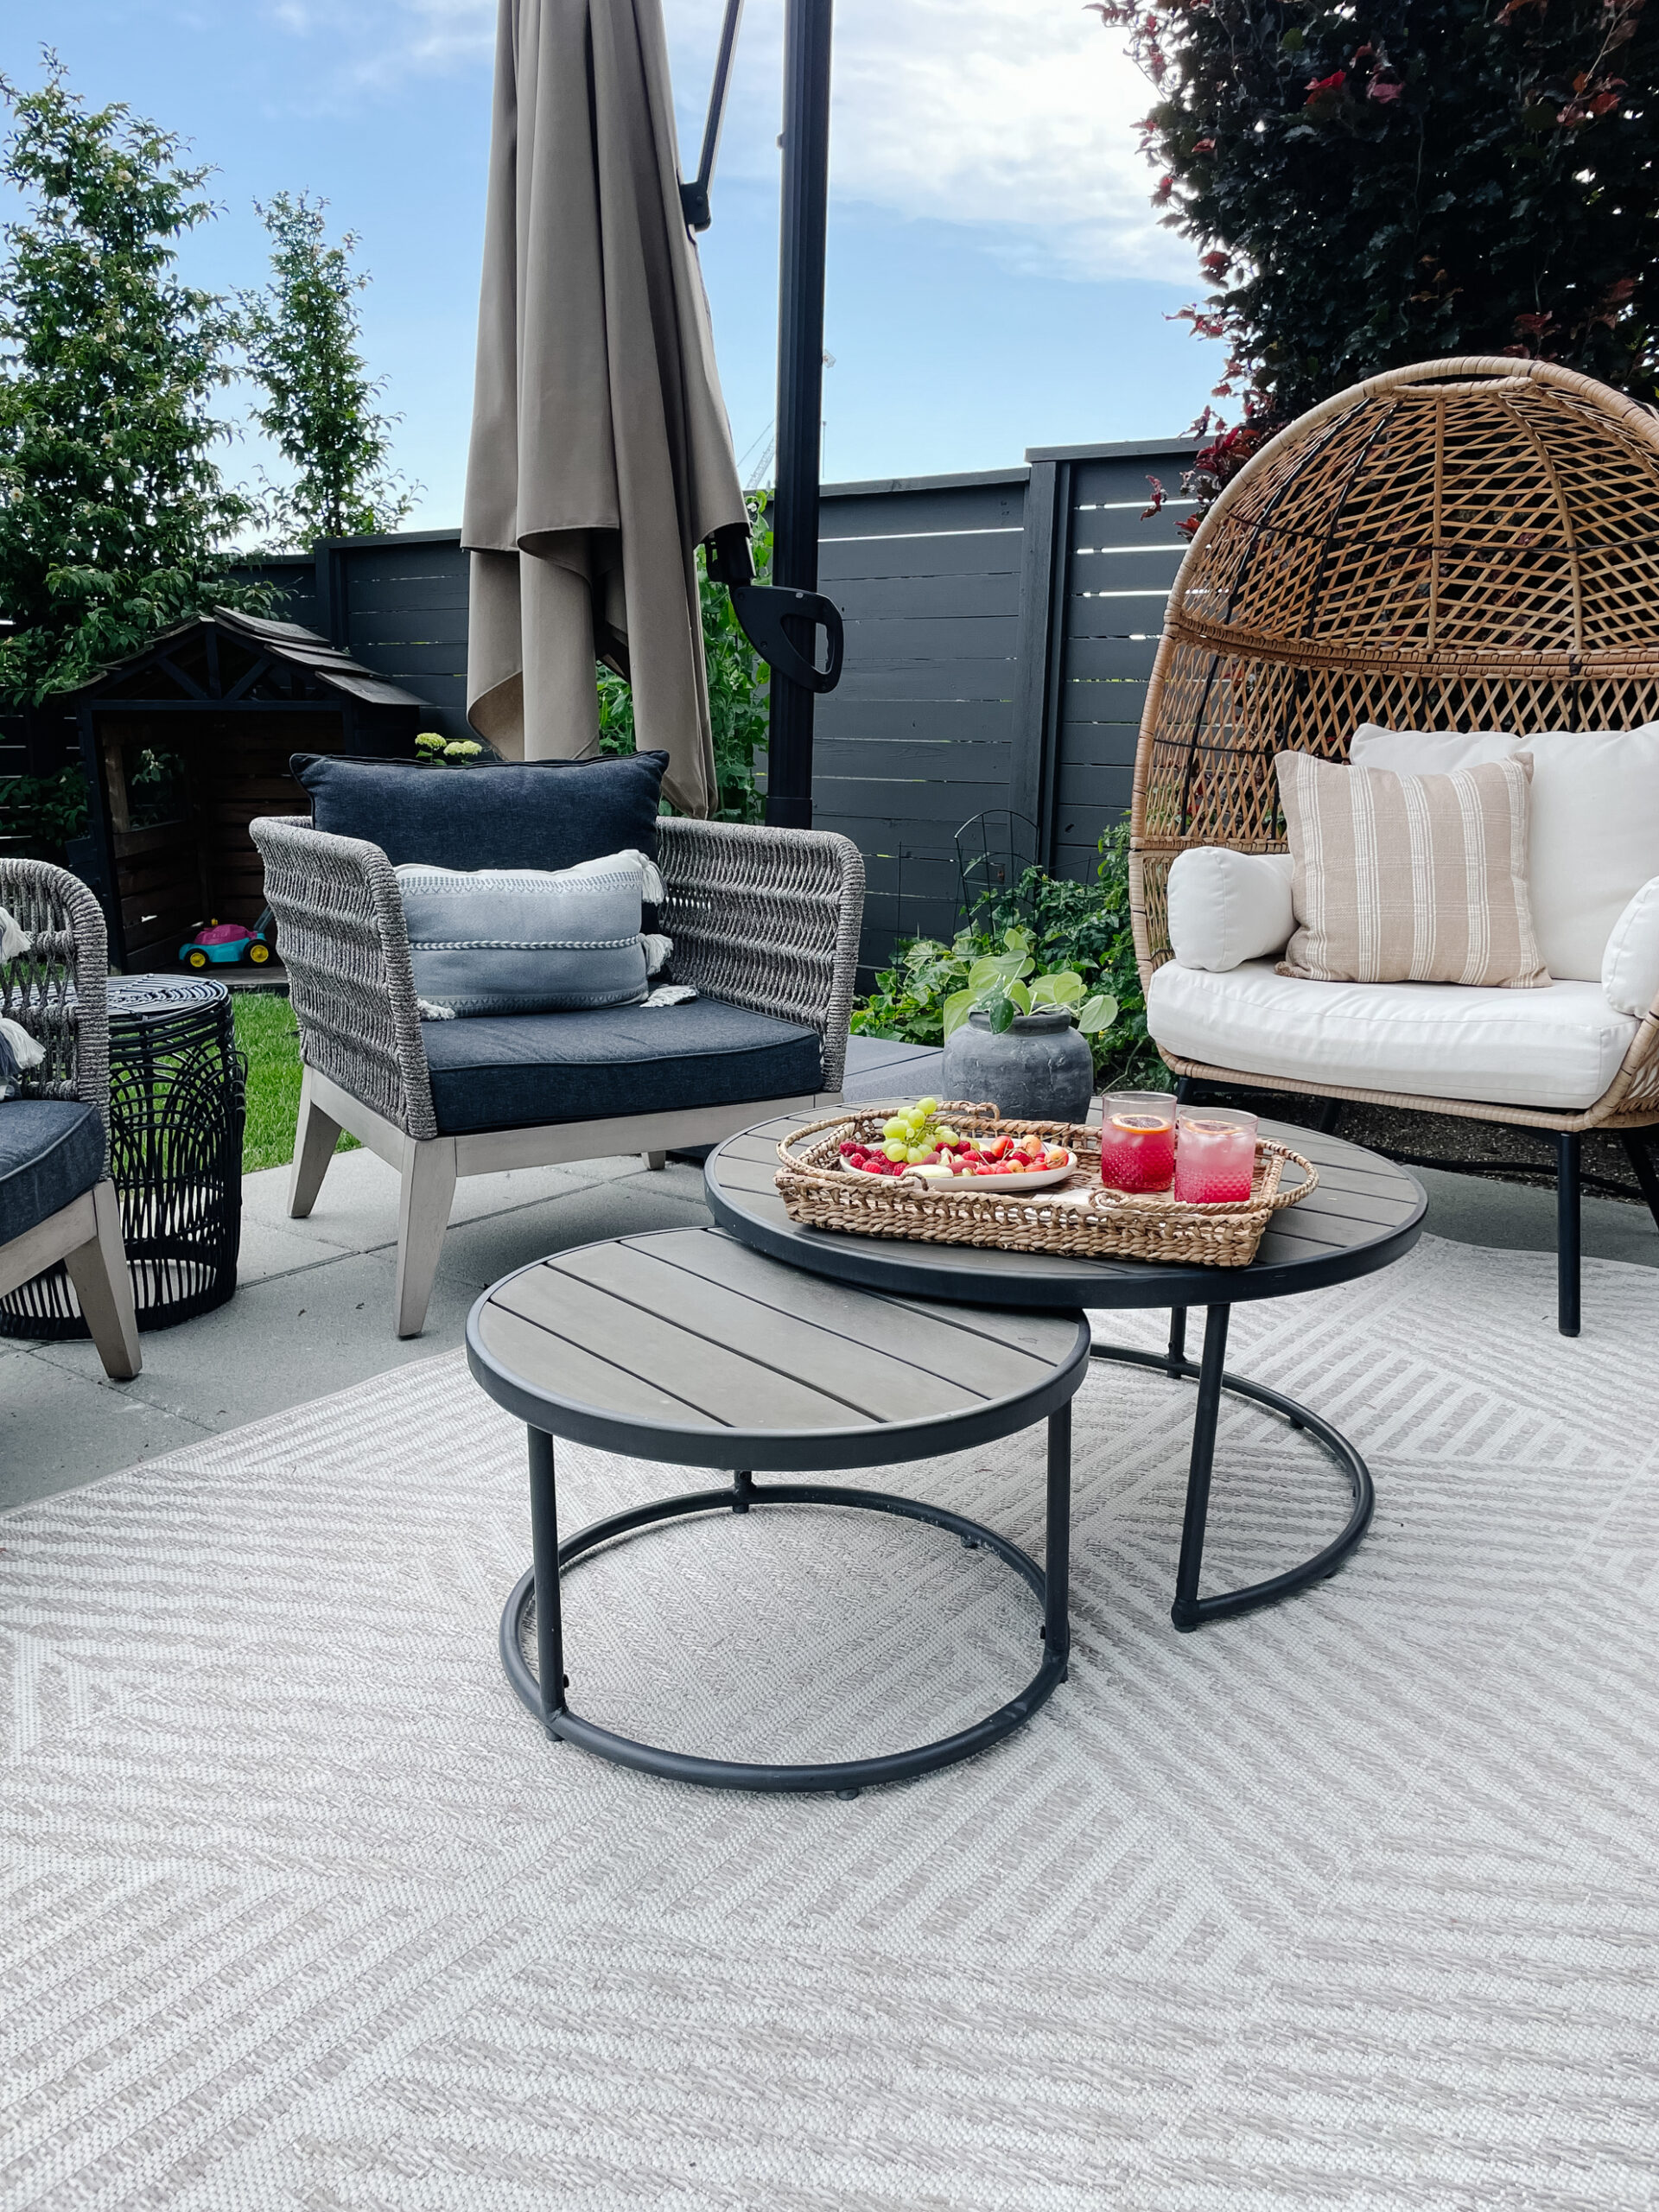 backyard patio space with outdoor furniture a rug and throw pillows, table and food set up